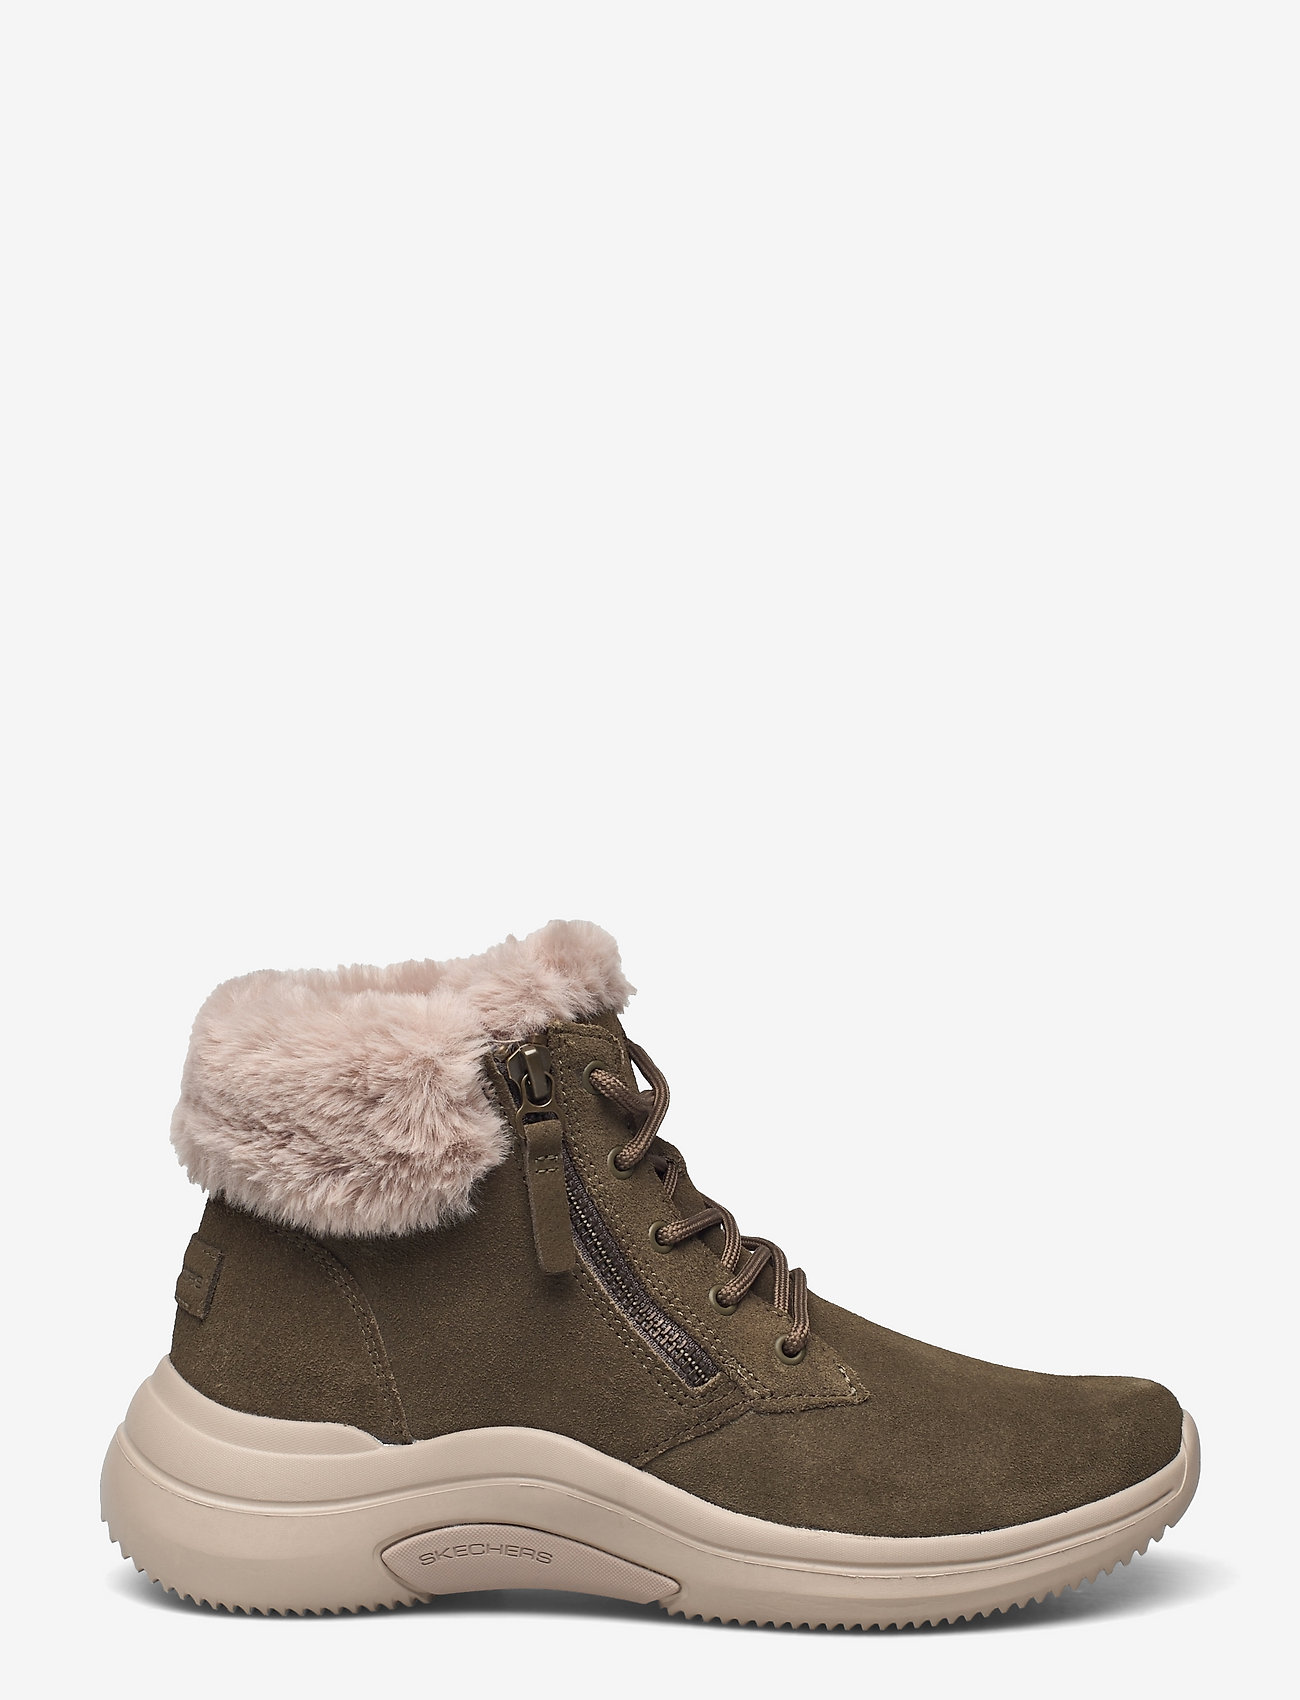 Skechers - Womens On-The-Go Midtown - Goodnatured - winter shoes - olv olive - 1